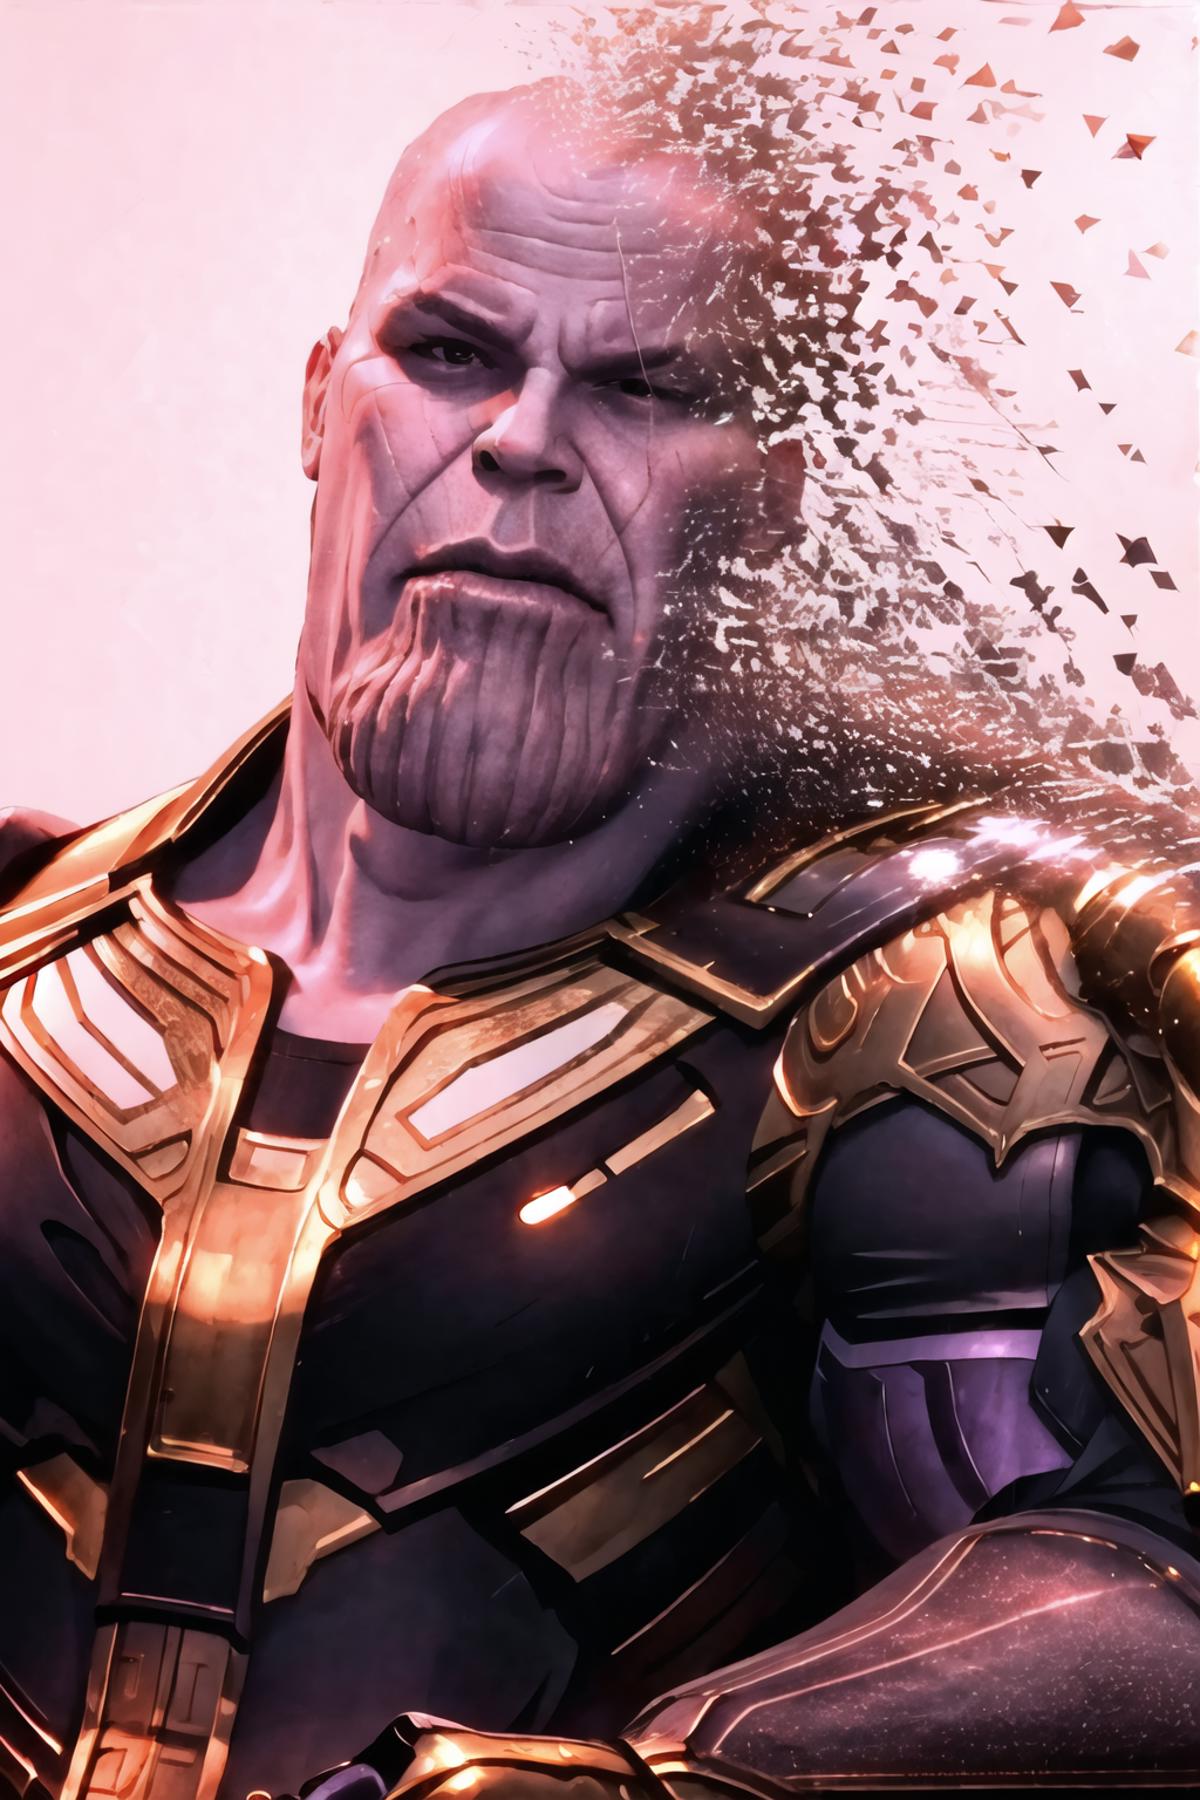 Thanos, the Mad Titan, in a colorful comic book cover.